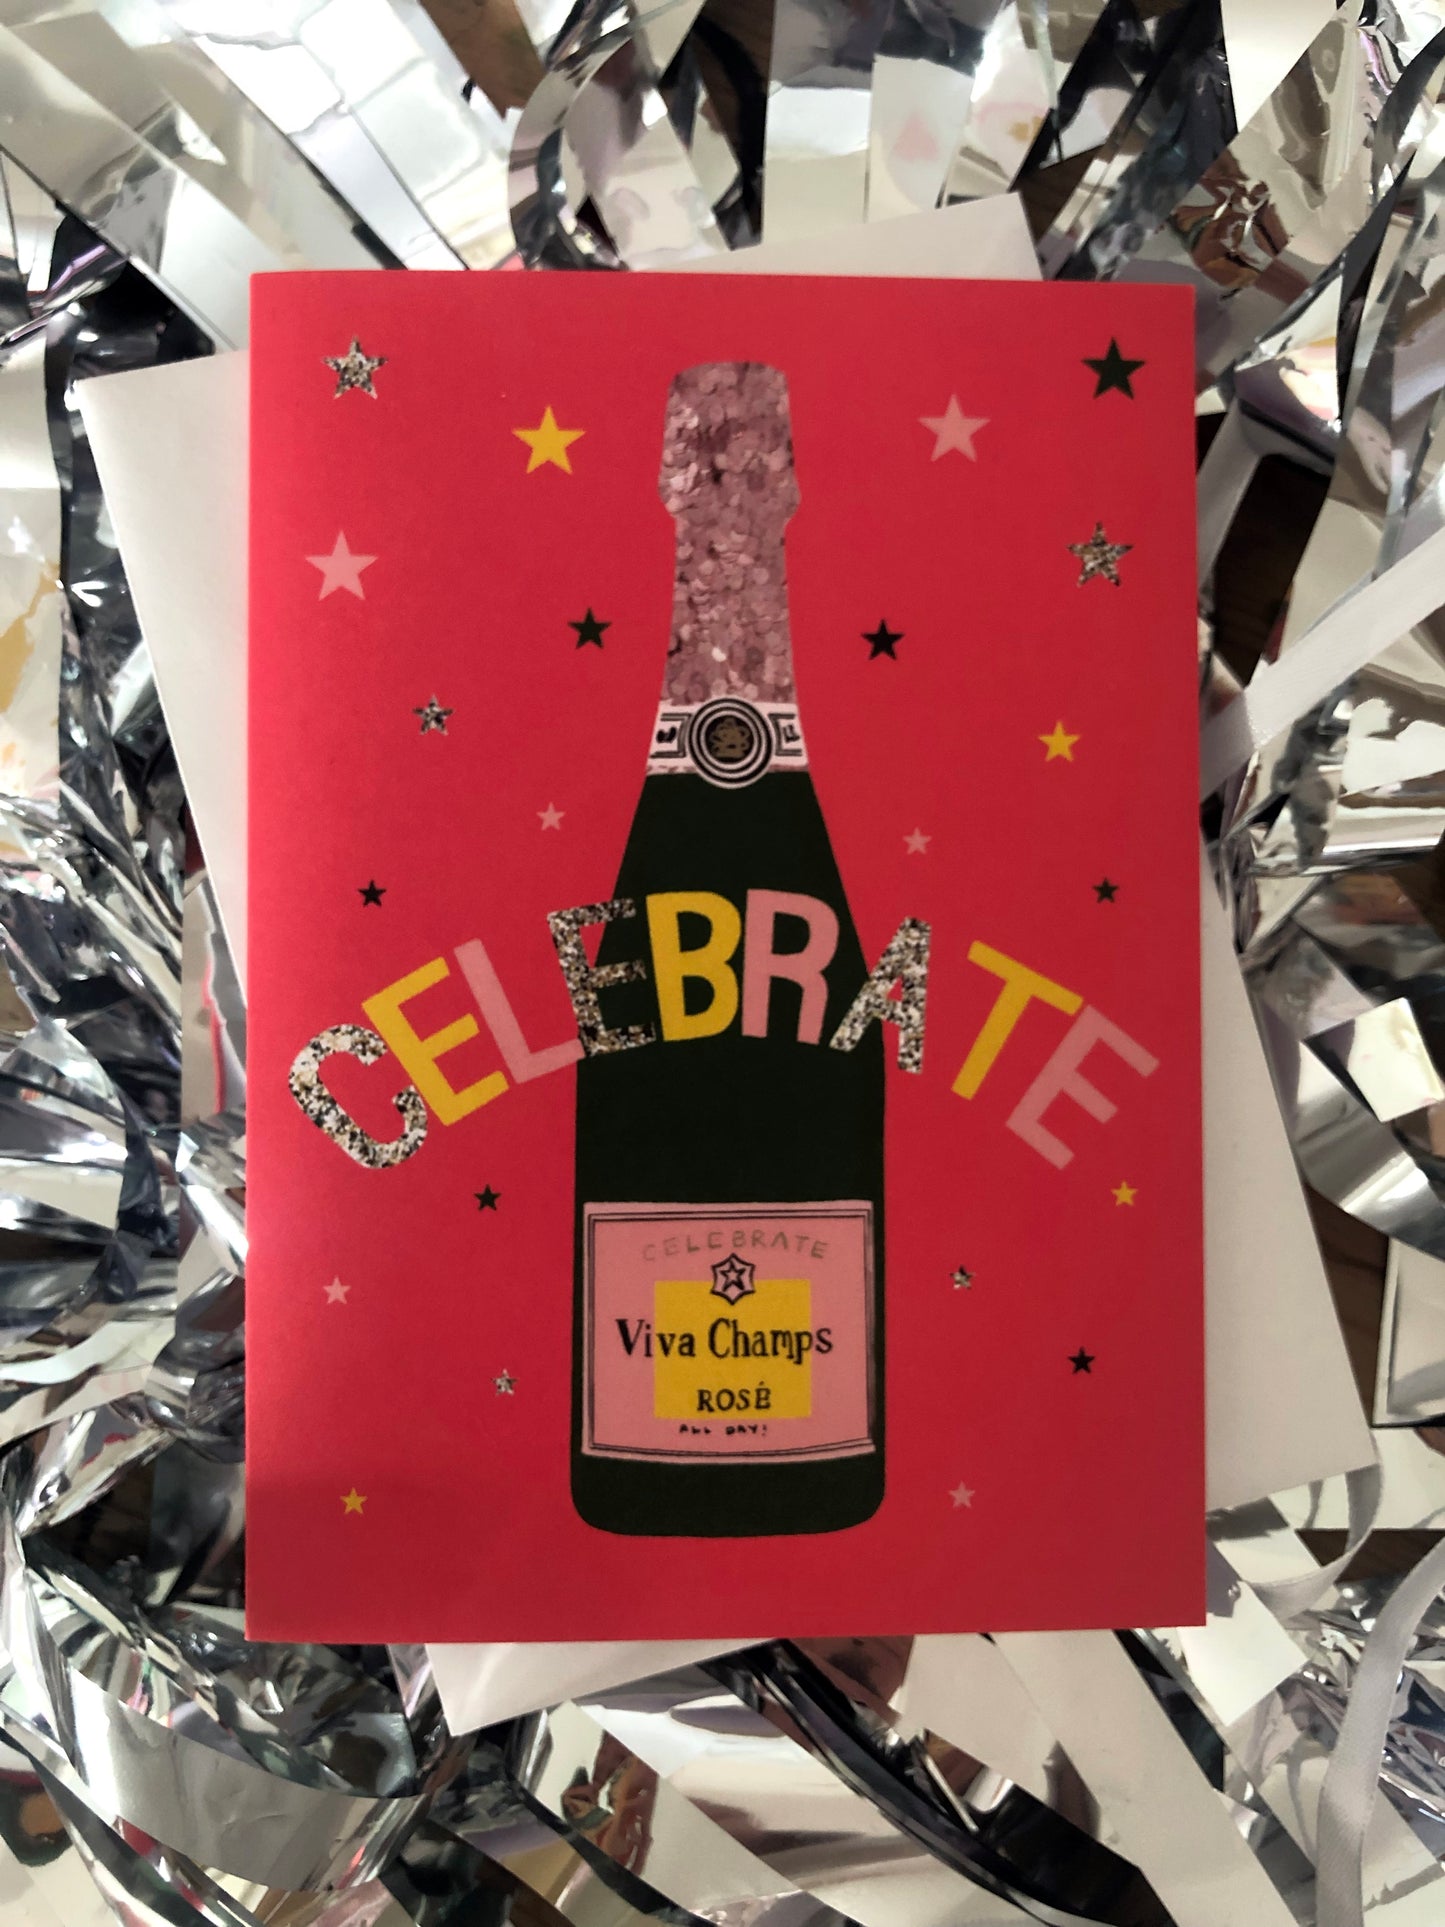 Bright red celebration card featuring a champagne bottle and stars